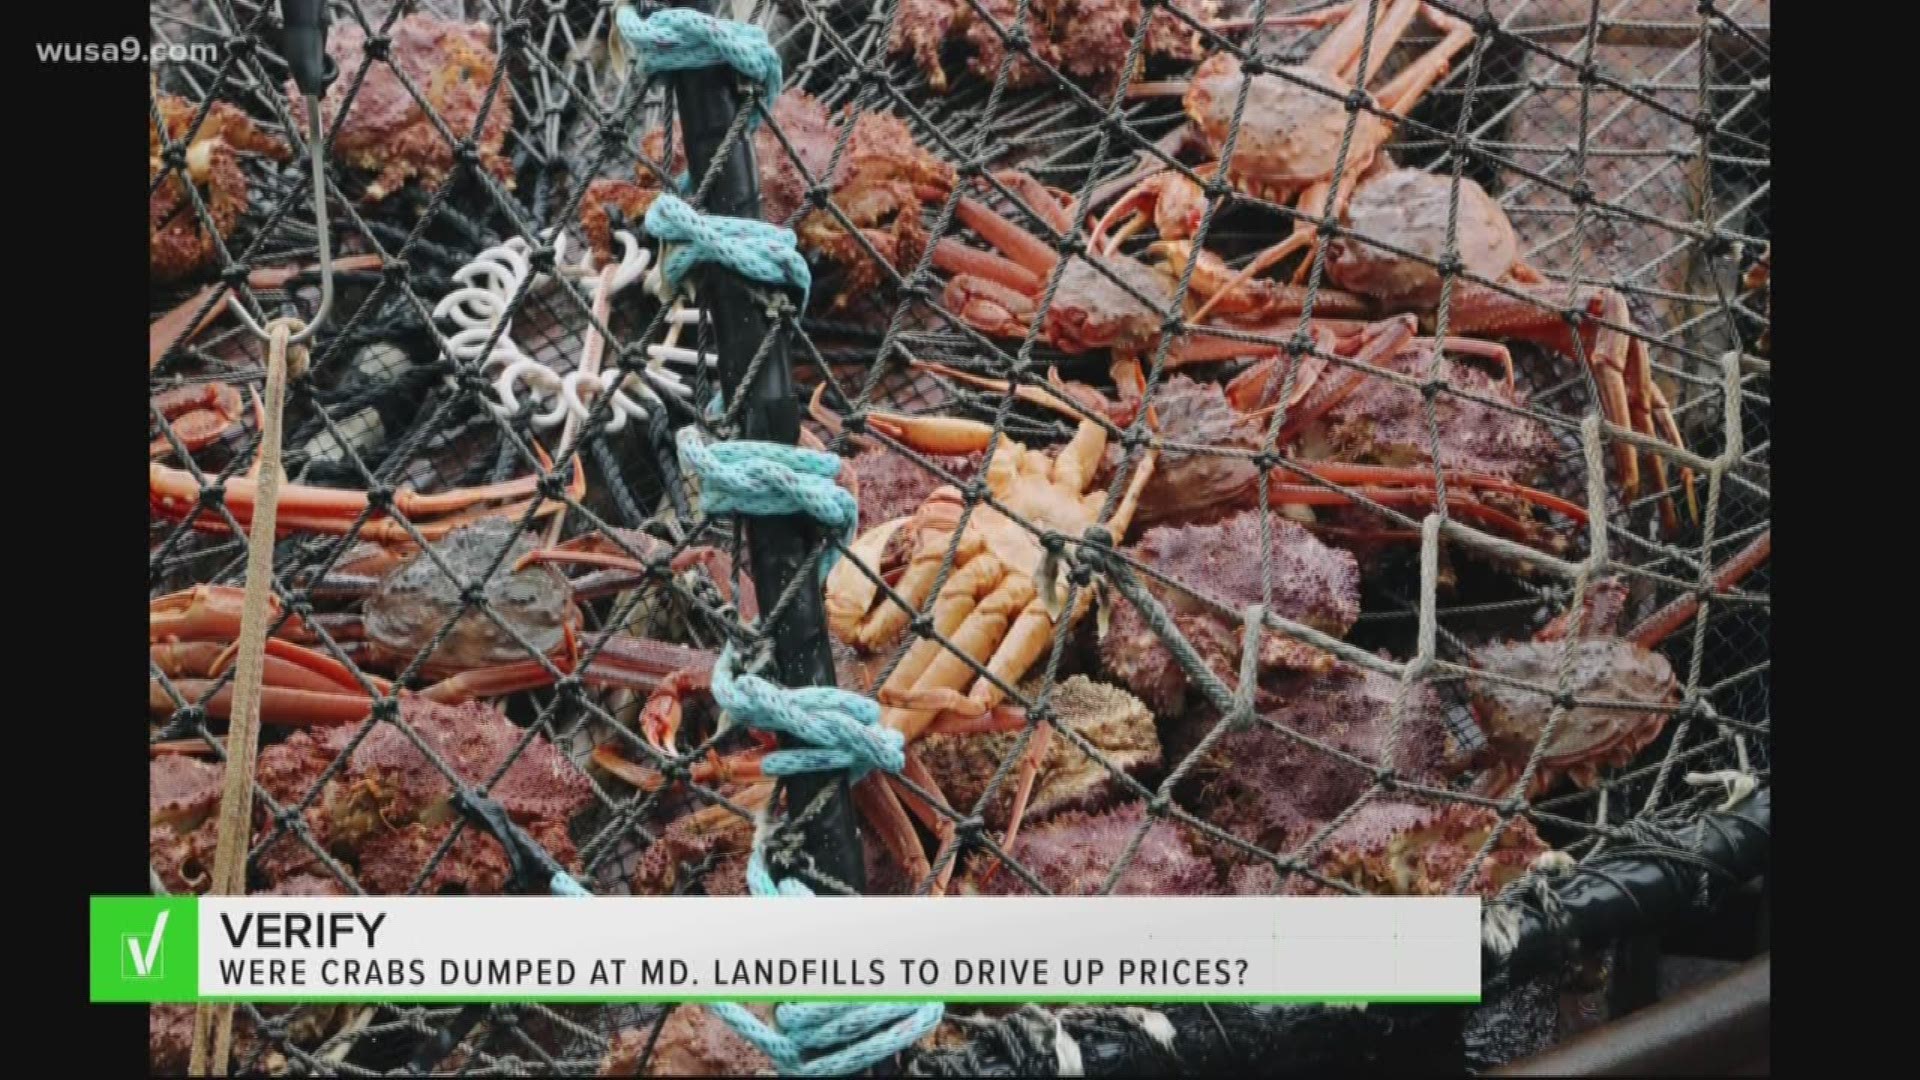 A viewer heard crabs were being dumped to keep prices higher, as the peak crab season is coming to a close, the Verify team got cracking on this one.